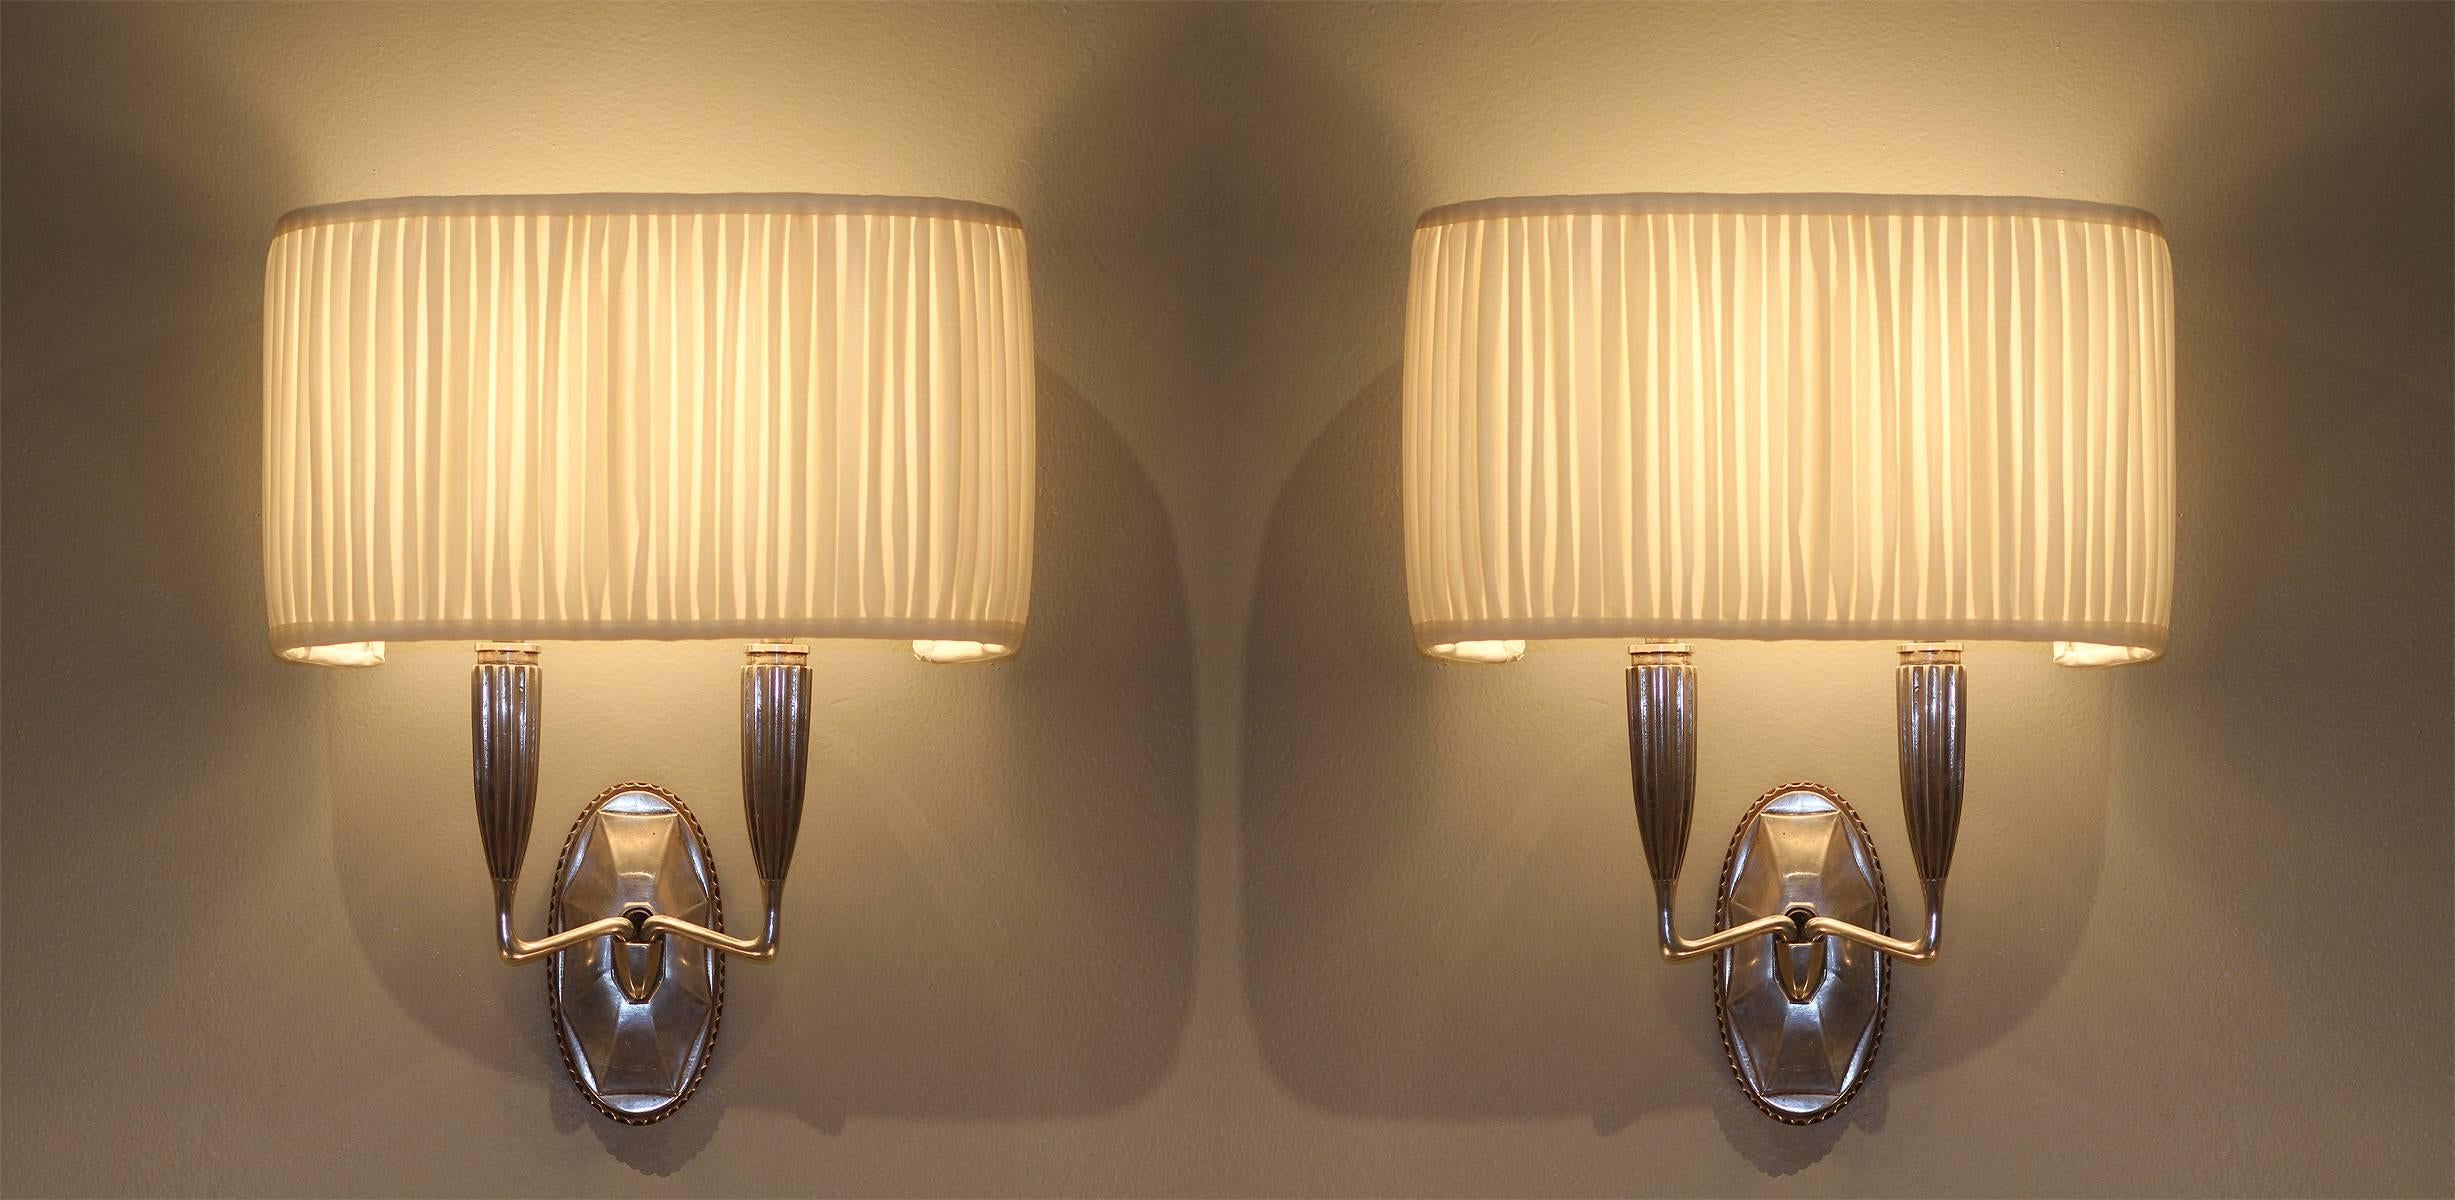 Exceptional set of four silver-plated bronze sconces designed by Emile-Jacques Ruhlmann (1879-1933).
Bronze casting by l'Art du bronze, France, circa 1925.
Rewired for US, bayonet sockets, 110v light bulbs. Silk pleated lampshades redone.
Measures: